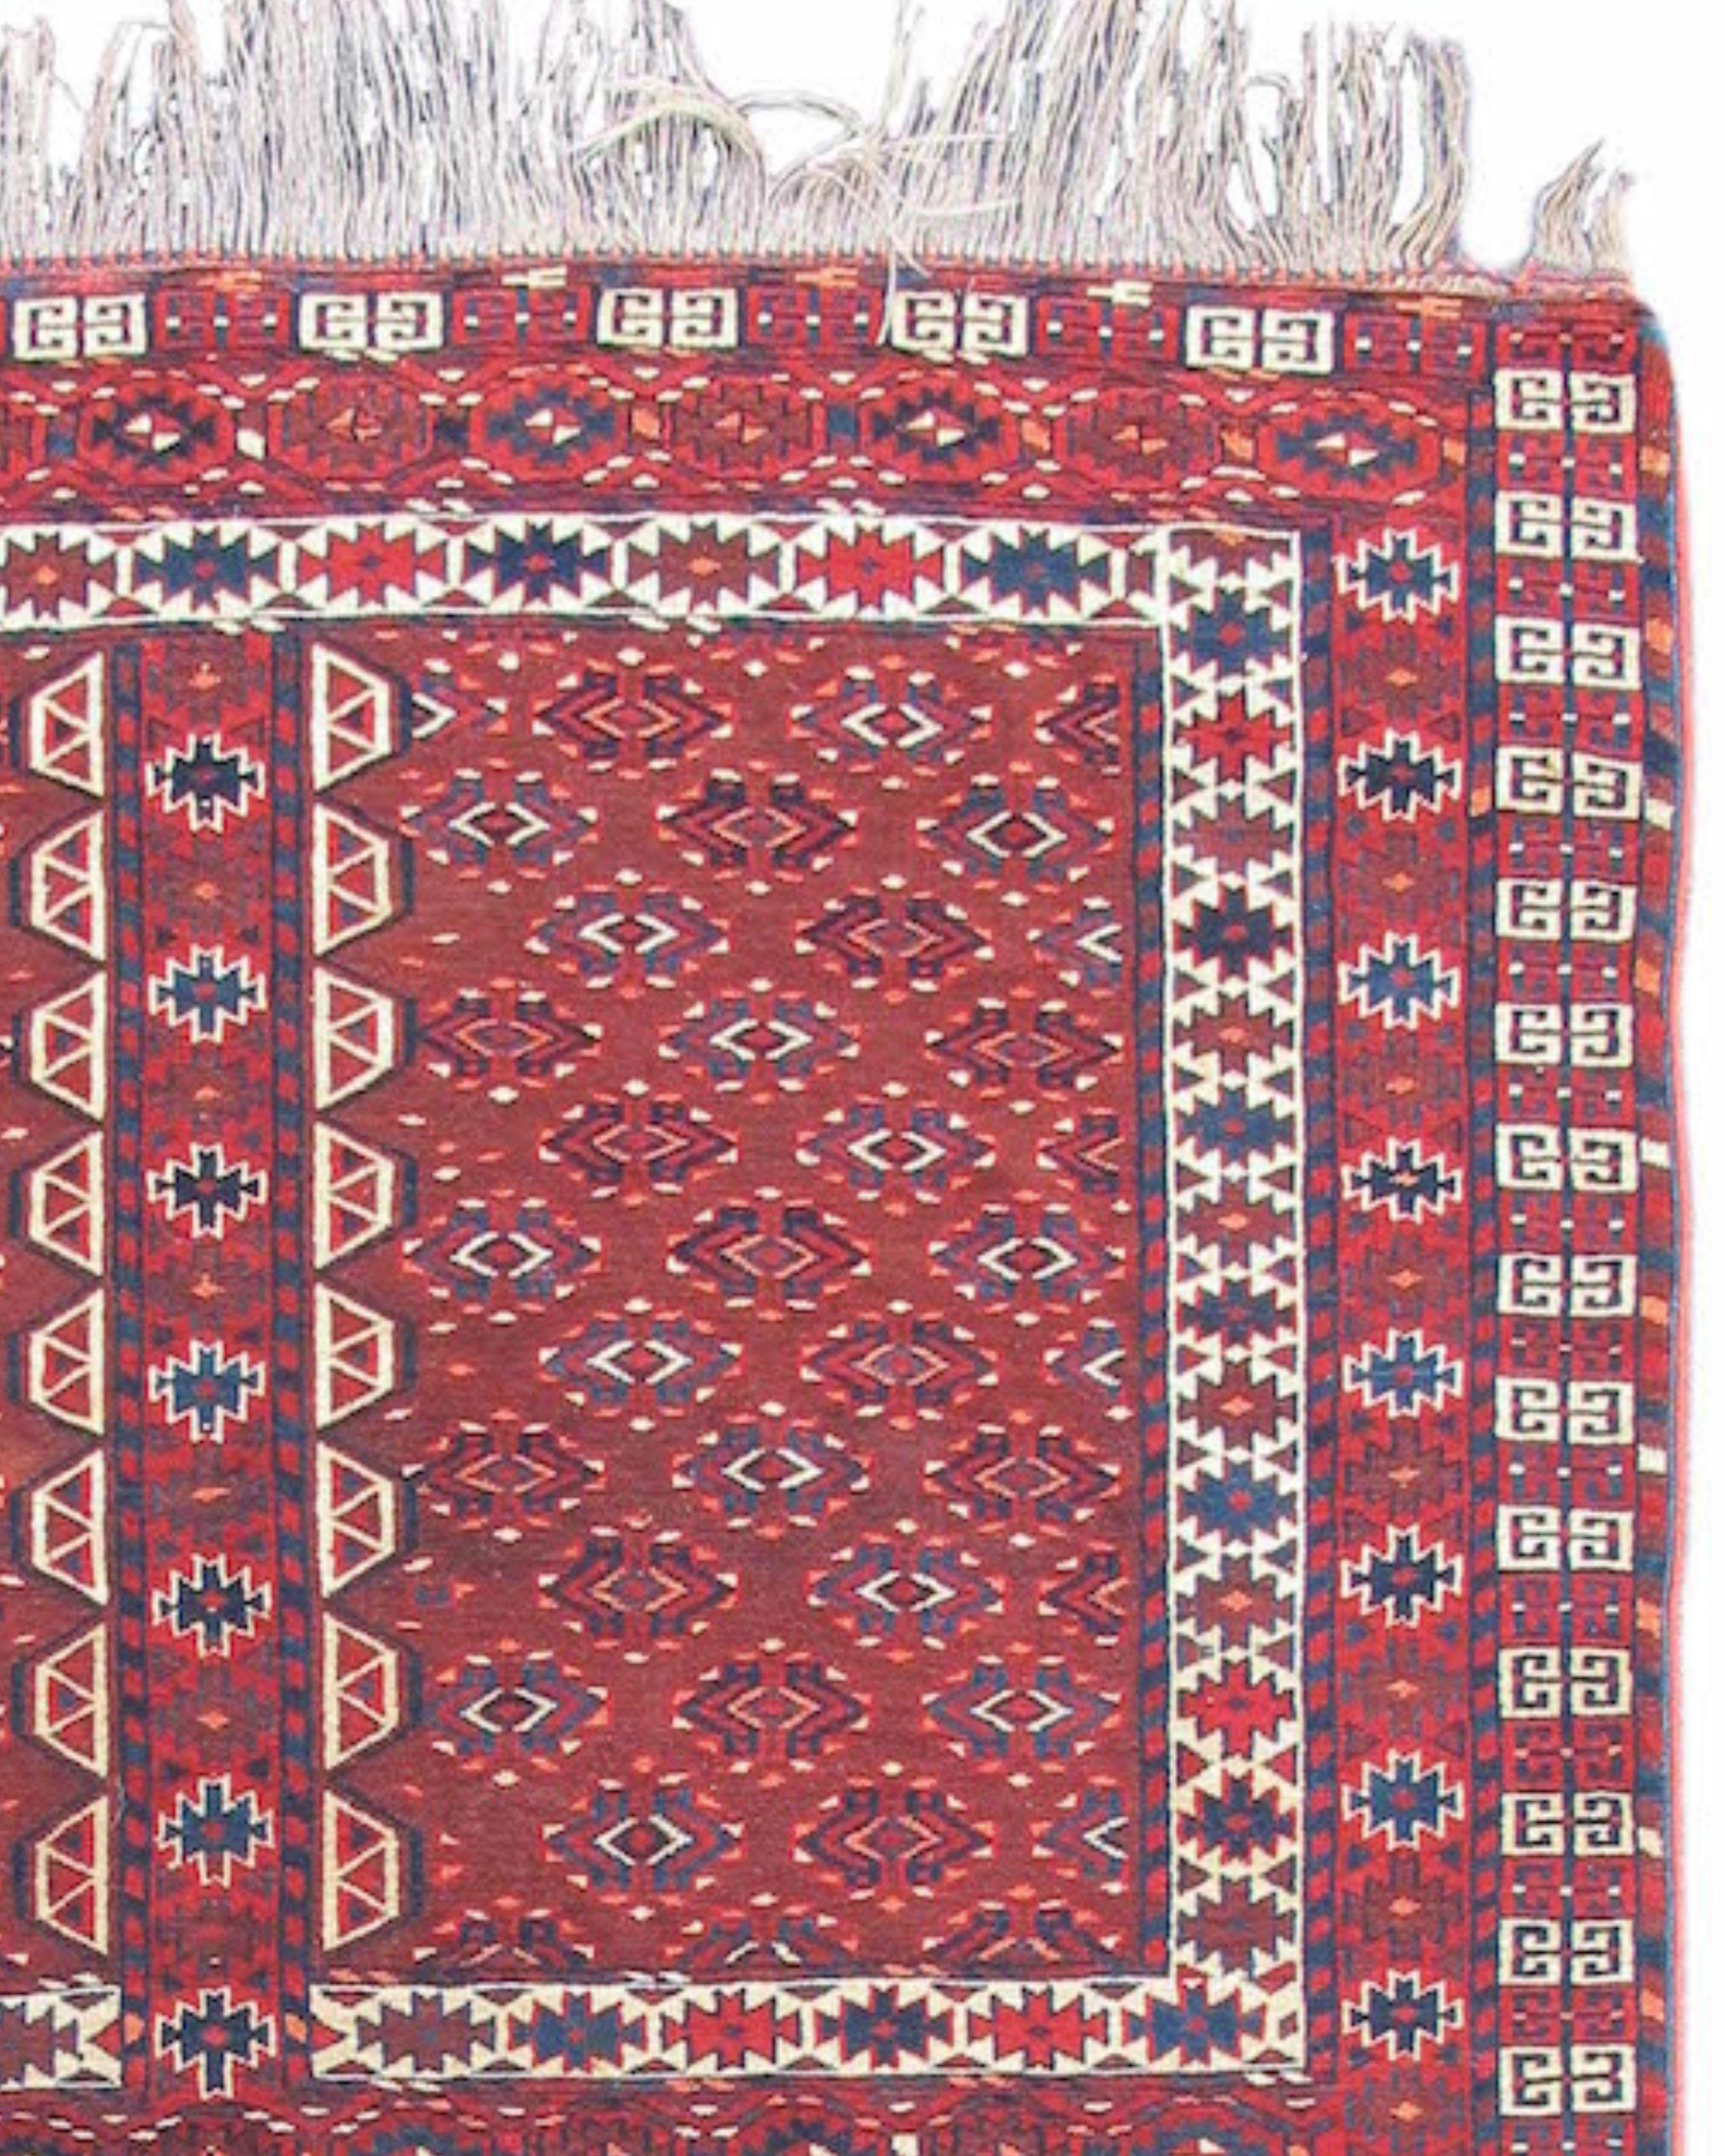 Antique Yomut Ensi Rug, Late 19th Century

An ensi is a rug woven as a door flap for the inside of a Turkmen yurt. This Yomut group ensi draws a cruciform pattern mimicking the design of Central Asian wooden doors. The bottom panel, or ‘elem’